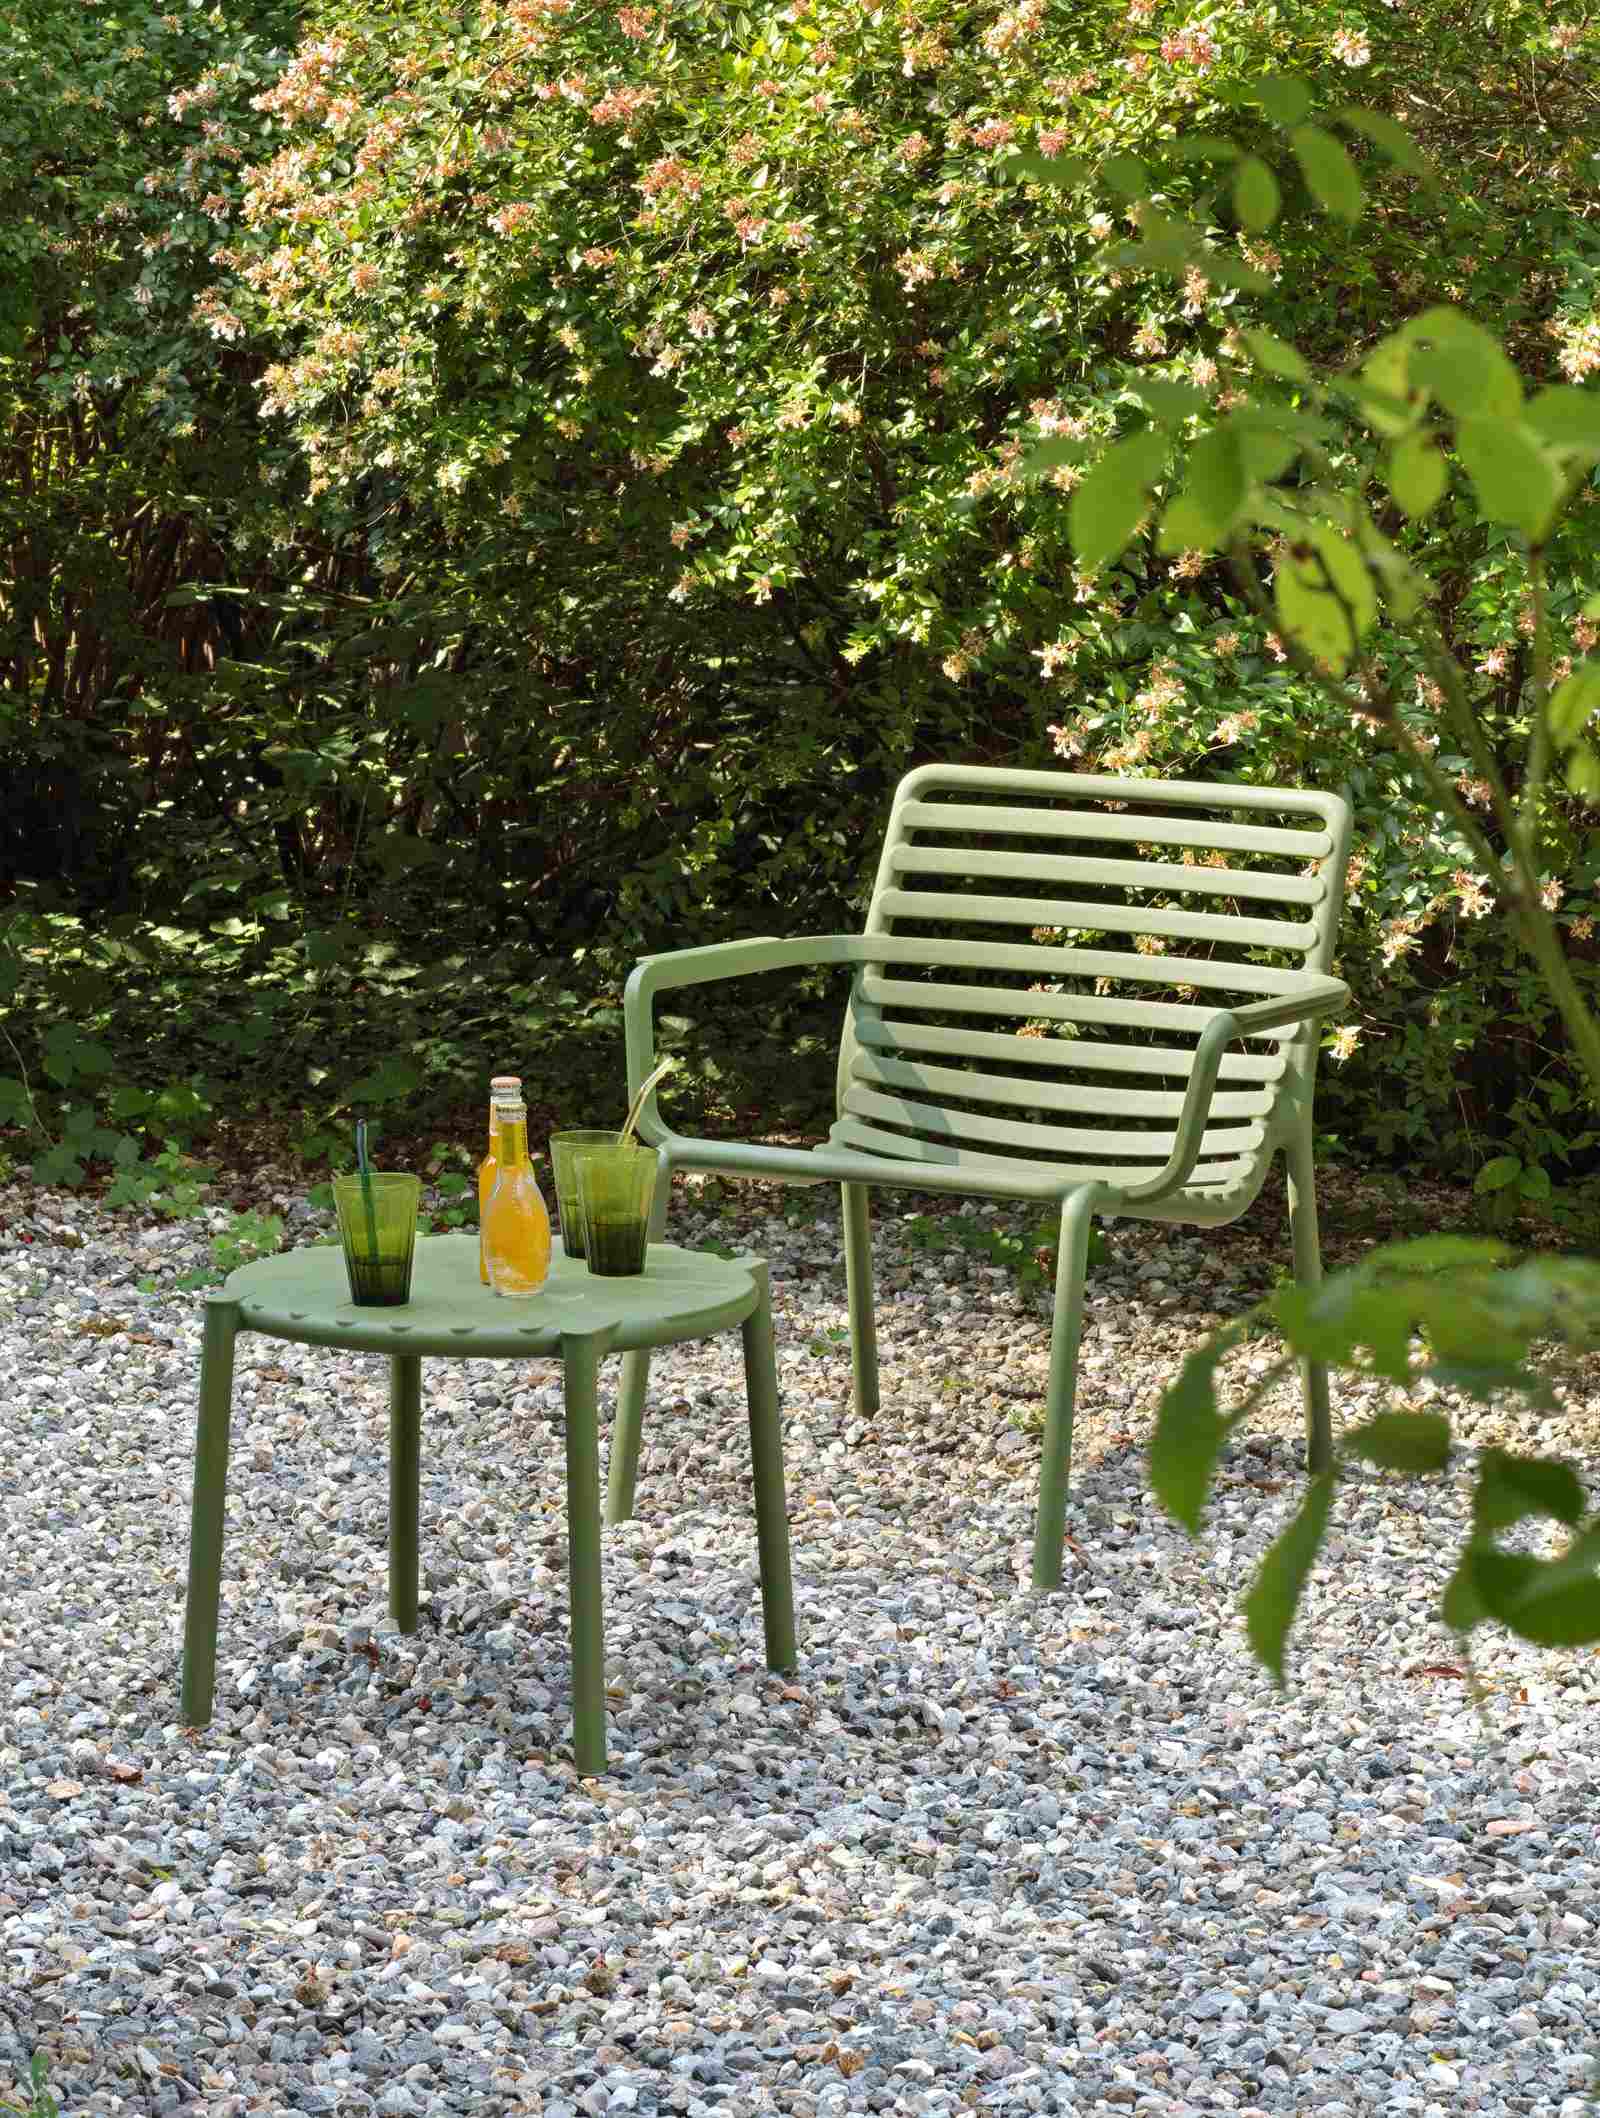 Remarkable Outdoor Living: Nadi Doga Outdoor Resin Balcony Relax Chair.This image shows a calming garden scene with a single sage green chair and a matching round table. The furniture is set on a gravel surface, which gives it a rustic and natural look. On the table, there are two tall glasses, likely containing a refreshing green beverage, and a small bottle, which could be a syrup or juice to mix with the drinks. The lush greenery in the background, consisting of various shrubs and plants, indicates that this outdoor space is designed for relaxation, perhaps as a quiet corner in a garden where one could enjoy a drink and the tranquility of nature.